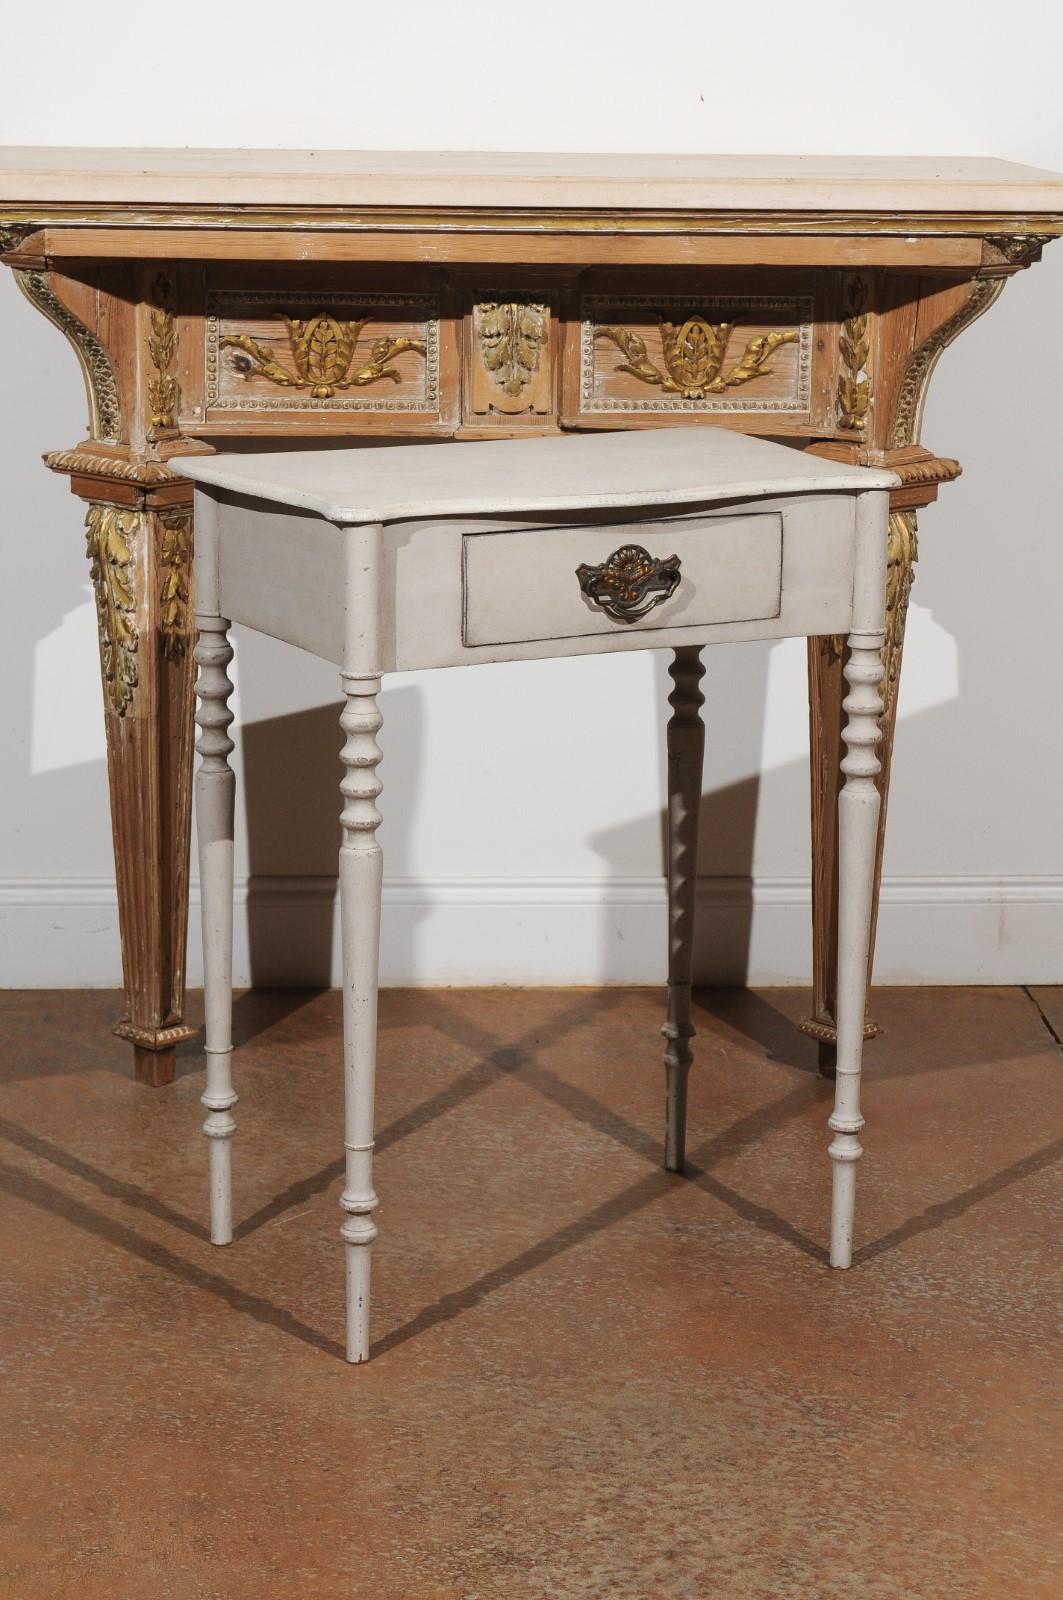 A Swedish small painted side table from the mid-19th century, with single drawer and turned legs. Born in Sweden during the mid-19th century, this lovely painted table features a rectangular top with serpentine front, sitting above a single